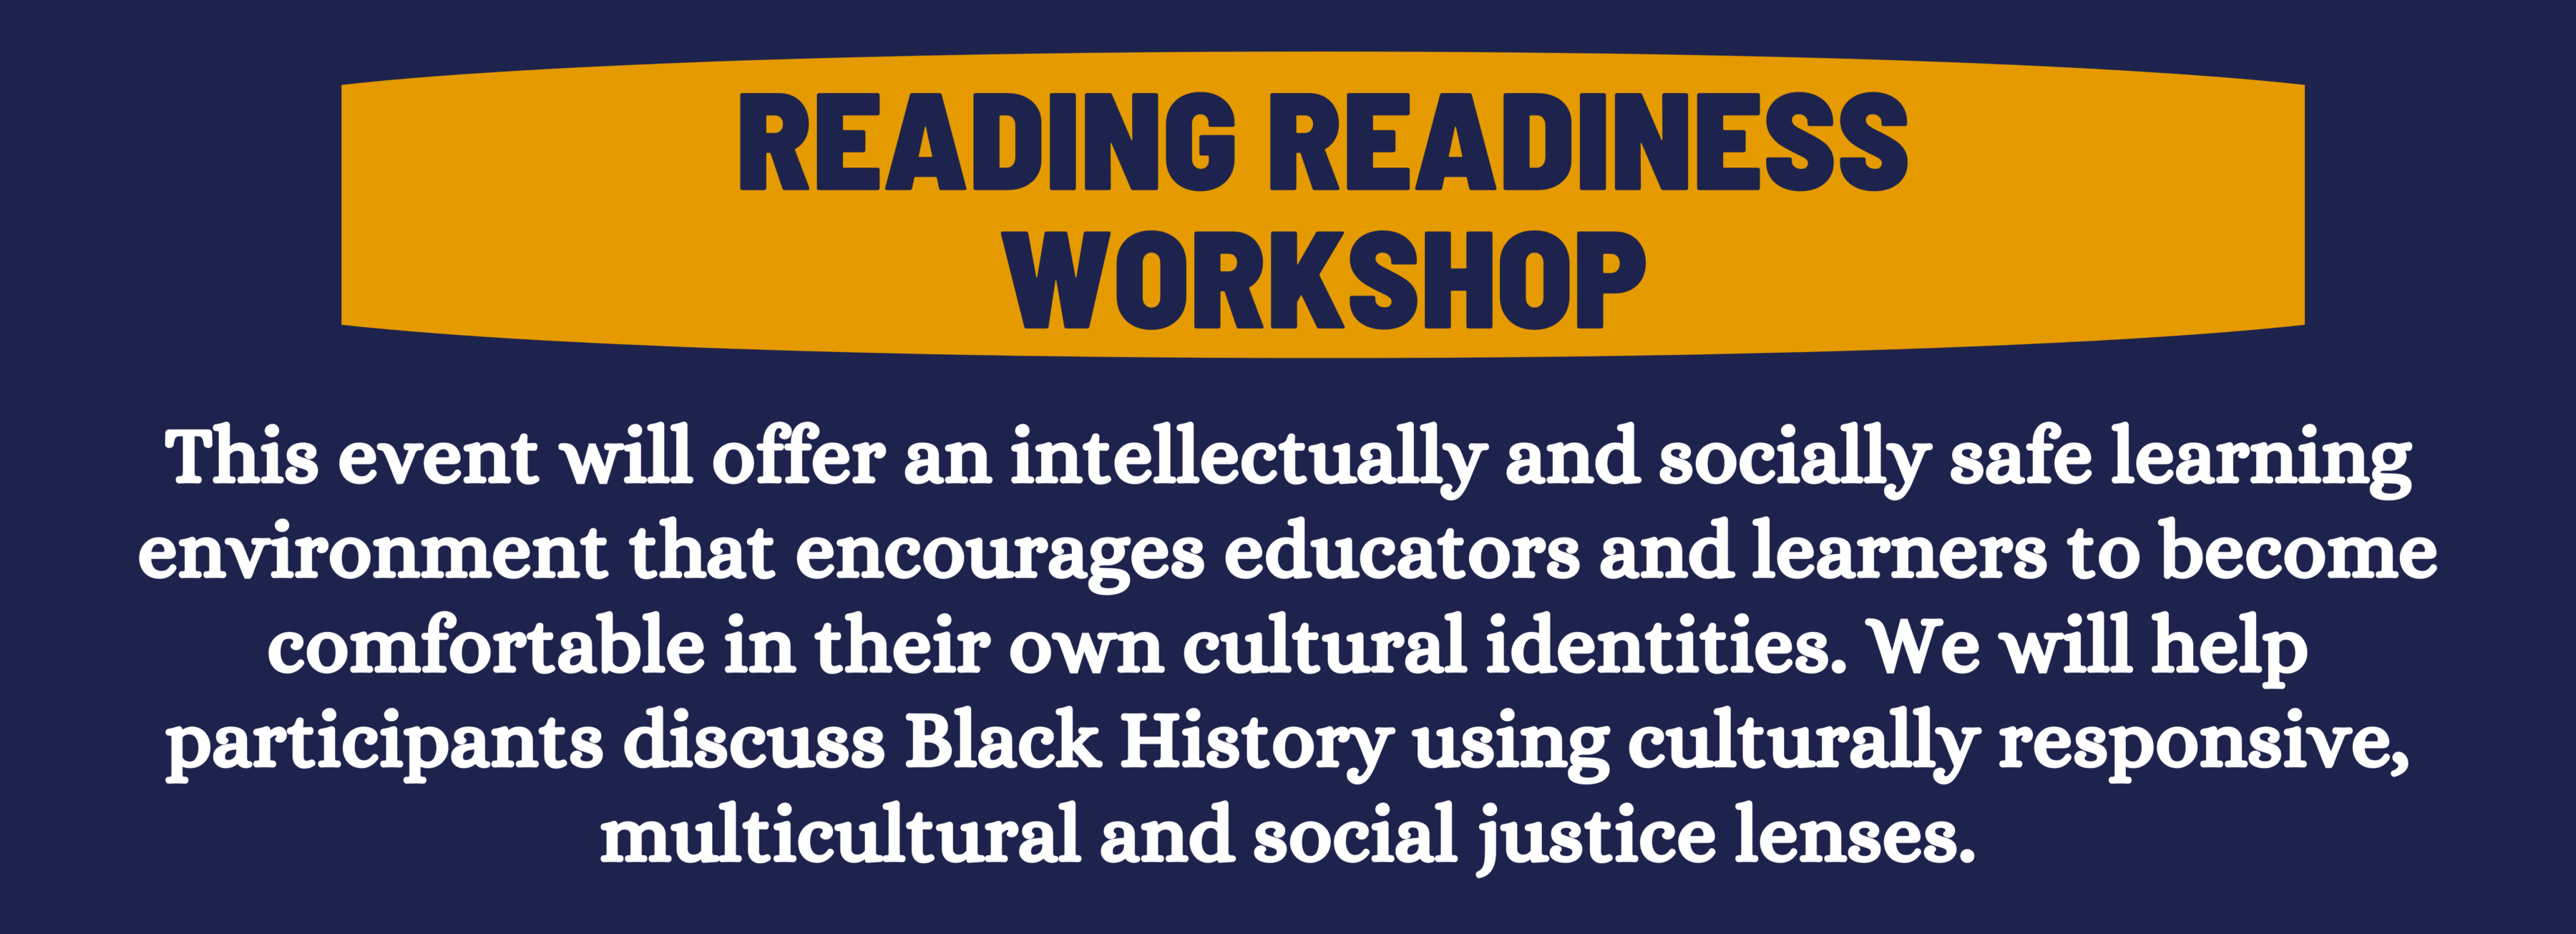 This event will offer an intellectually and socially safe learning environment that encourages educators and learners to become comfortable in their own cultural identities. We will help participants discuss Black History using culturally responsive, multicultural and social justice lenses.